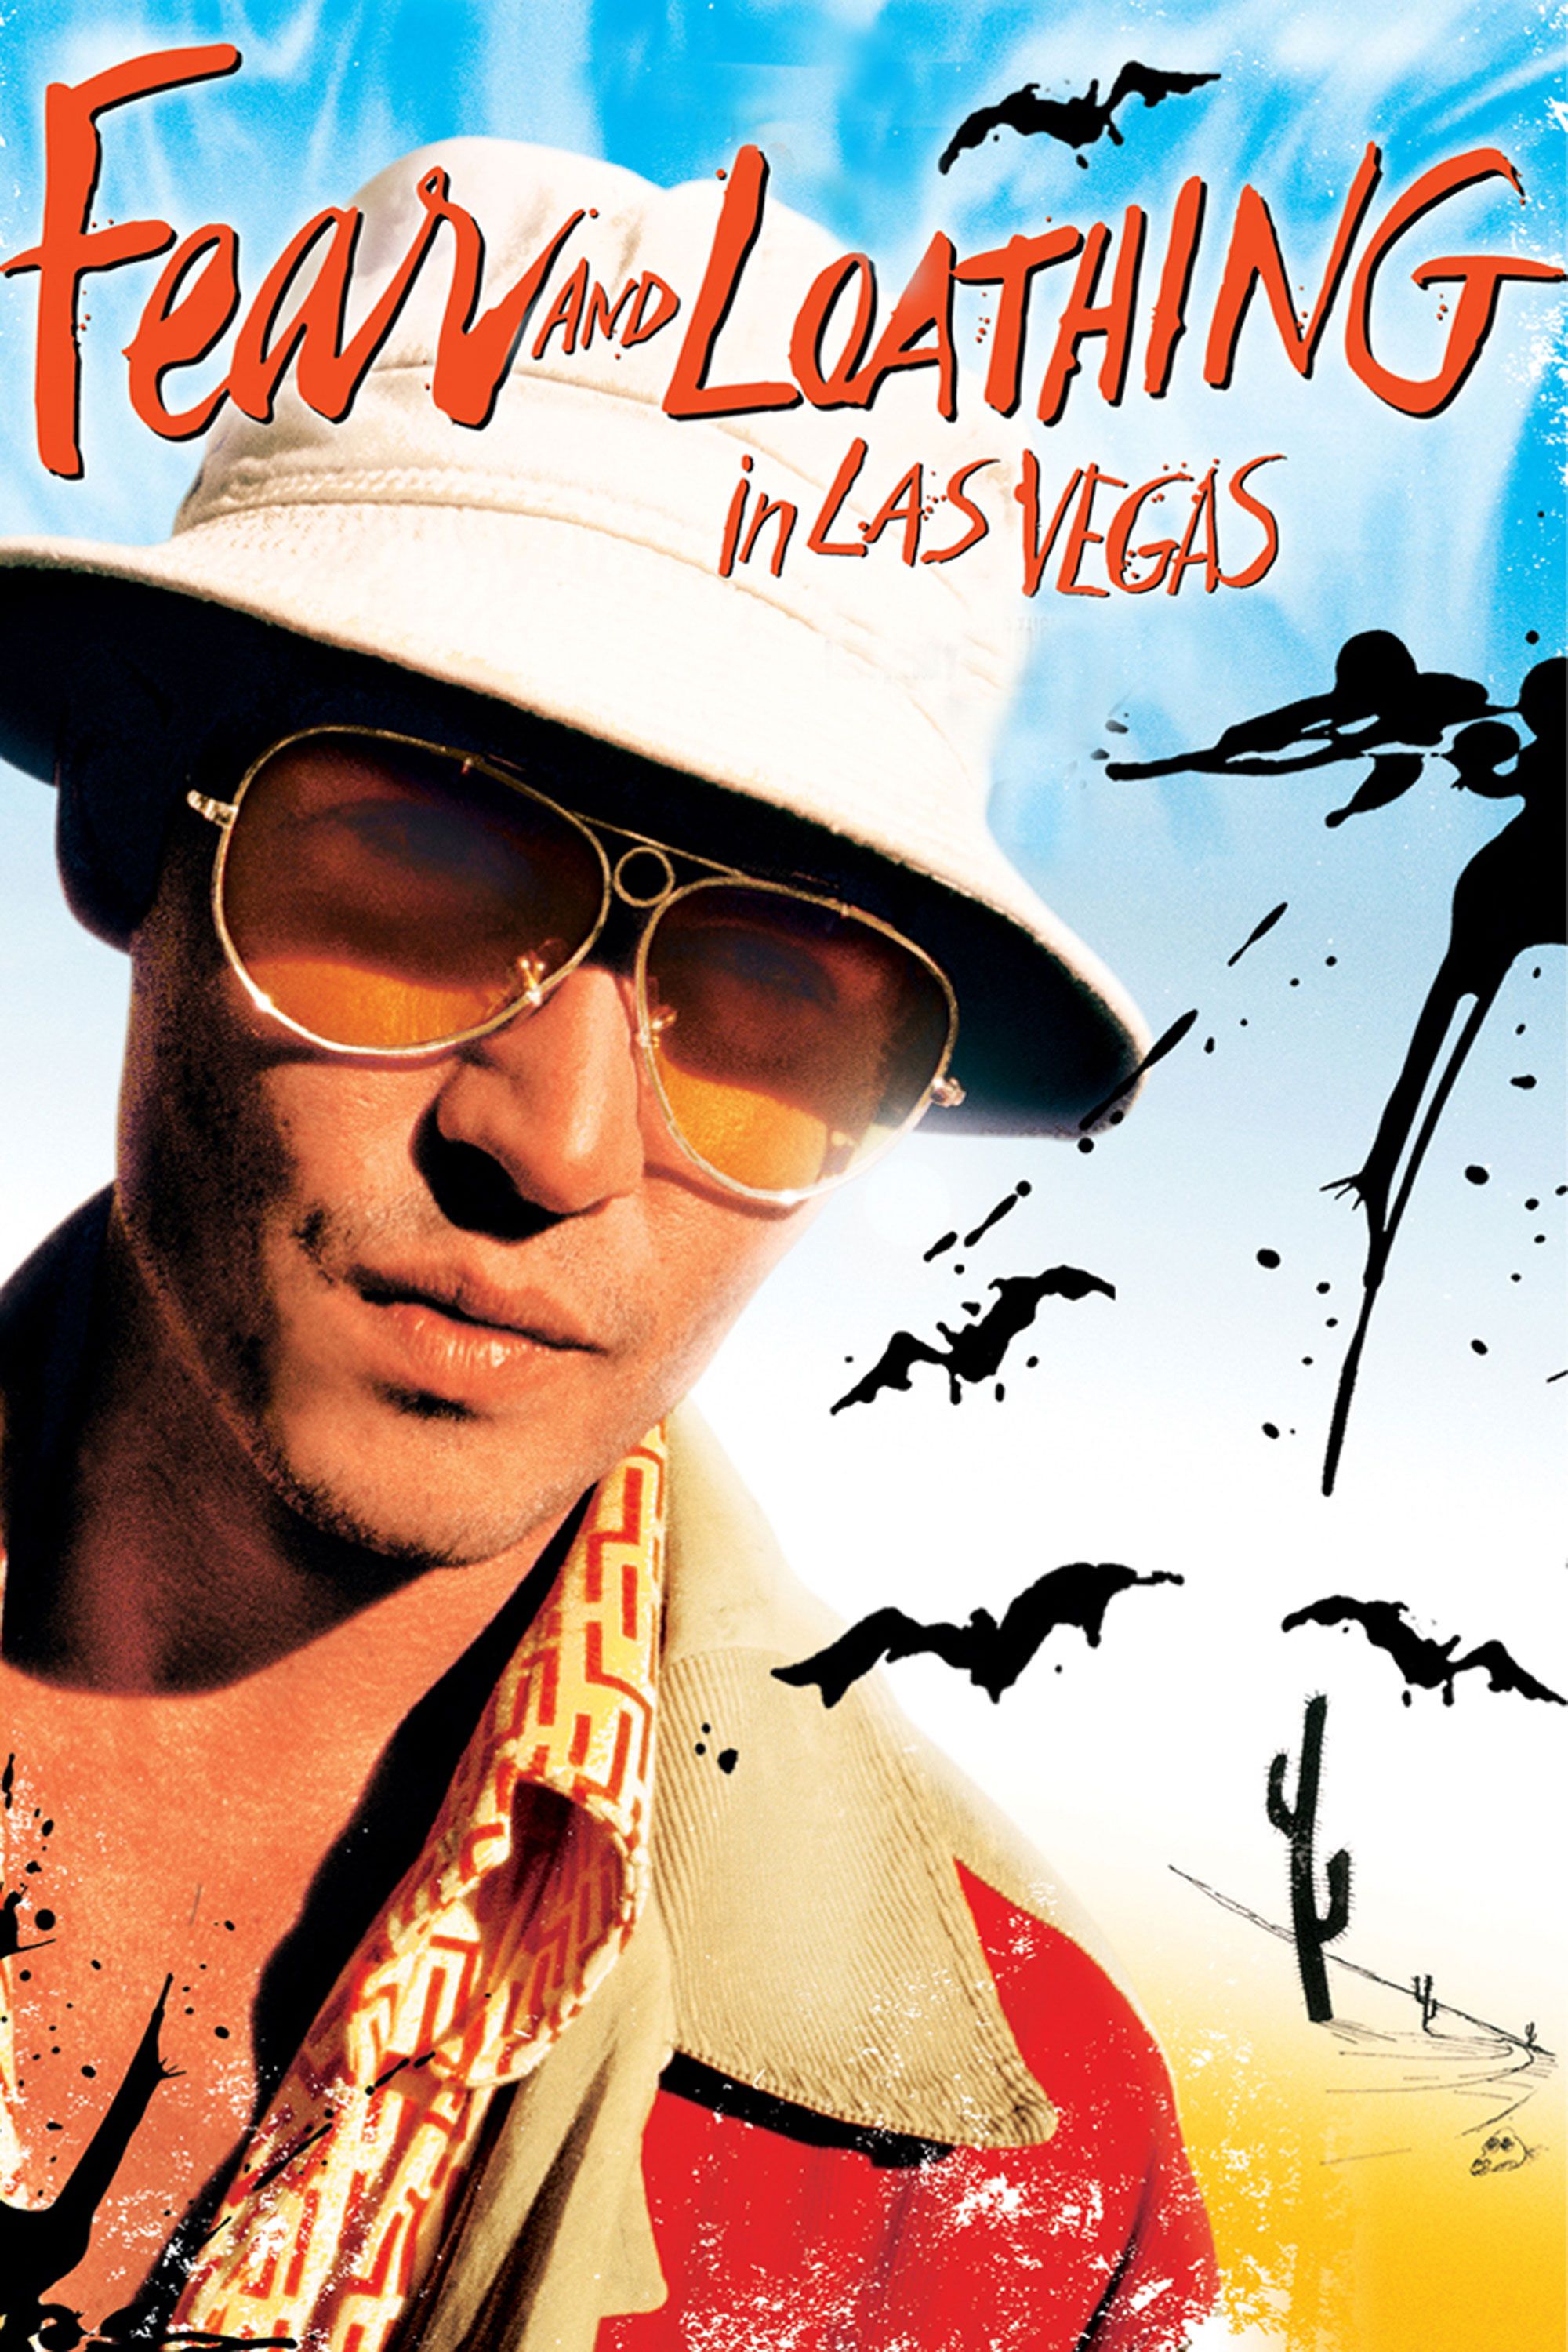 tekst chatten Trein Fear and Loathing in Las Vegas | Movies Anywhere